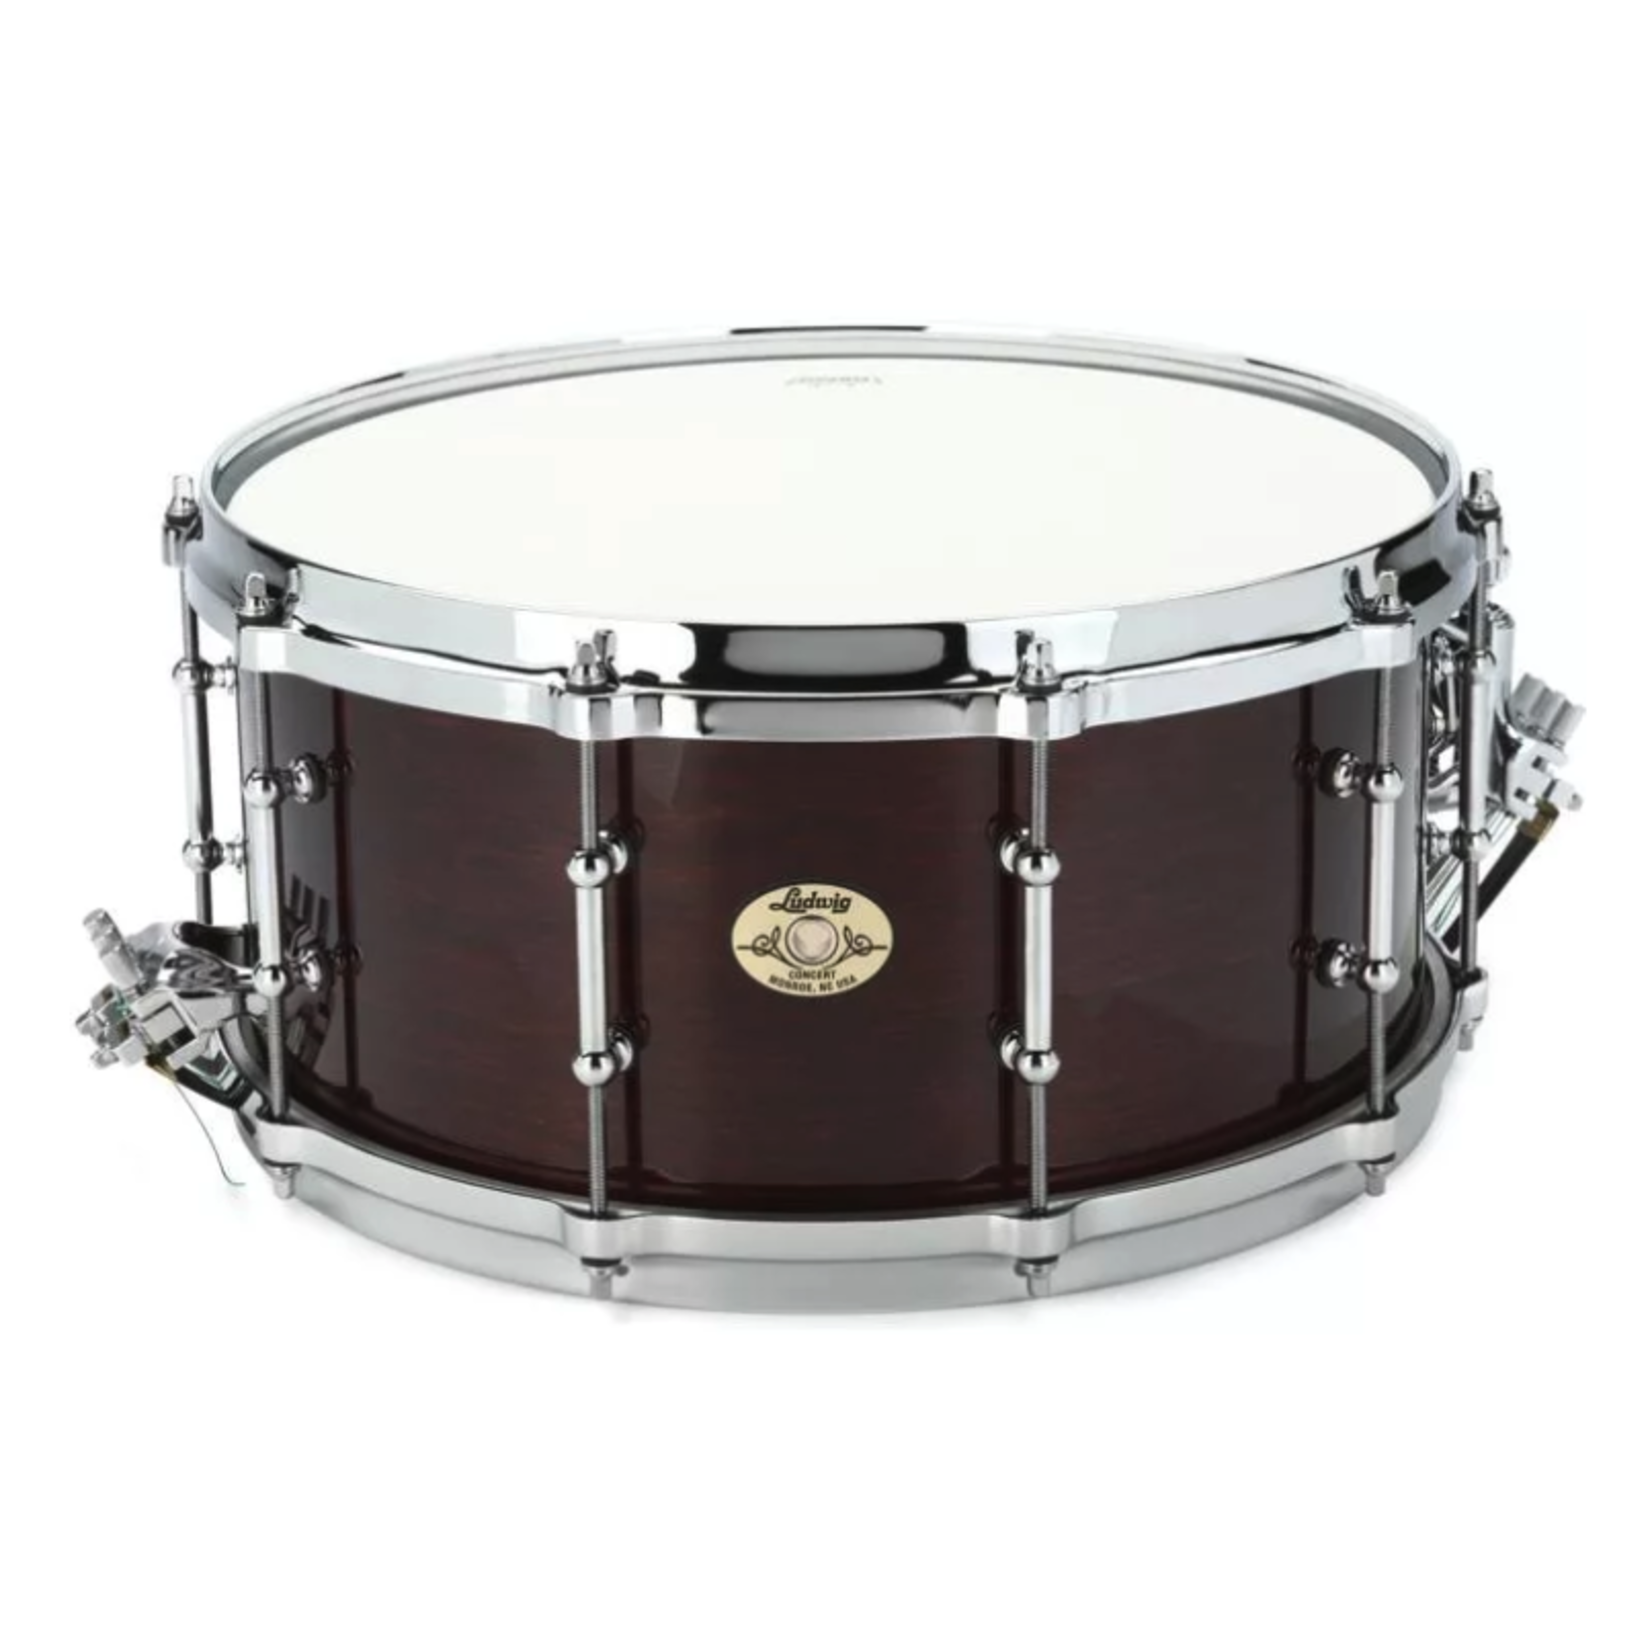 Ludwig 6.5 x 14 Mahogany Concert Snare Drum